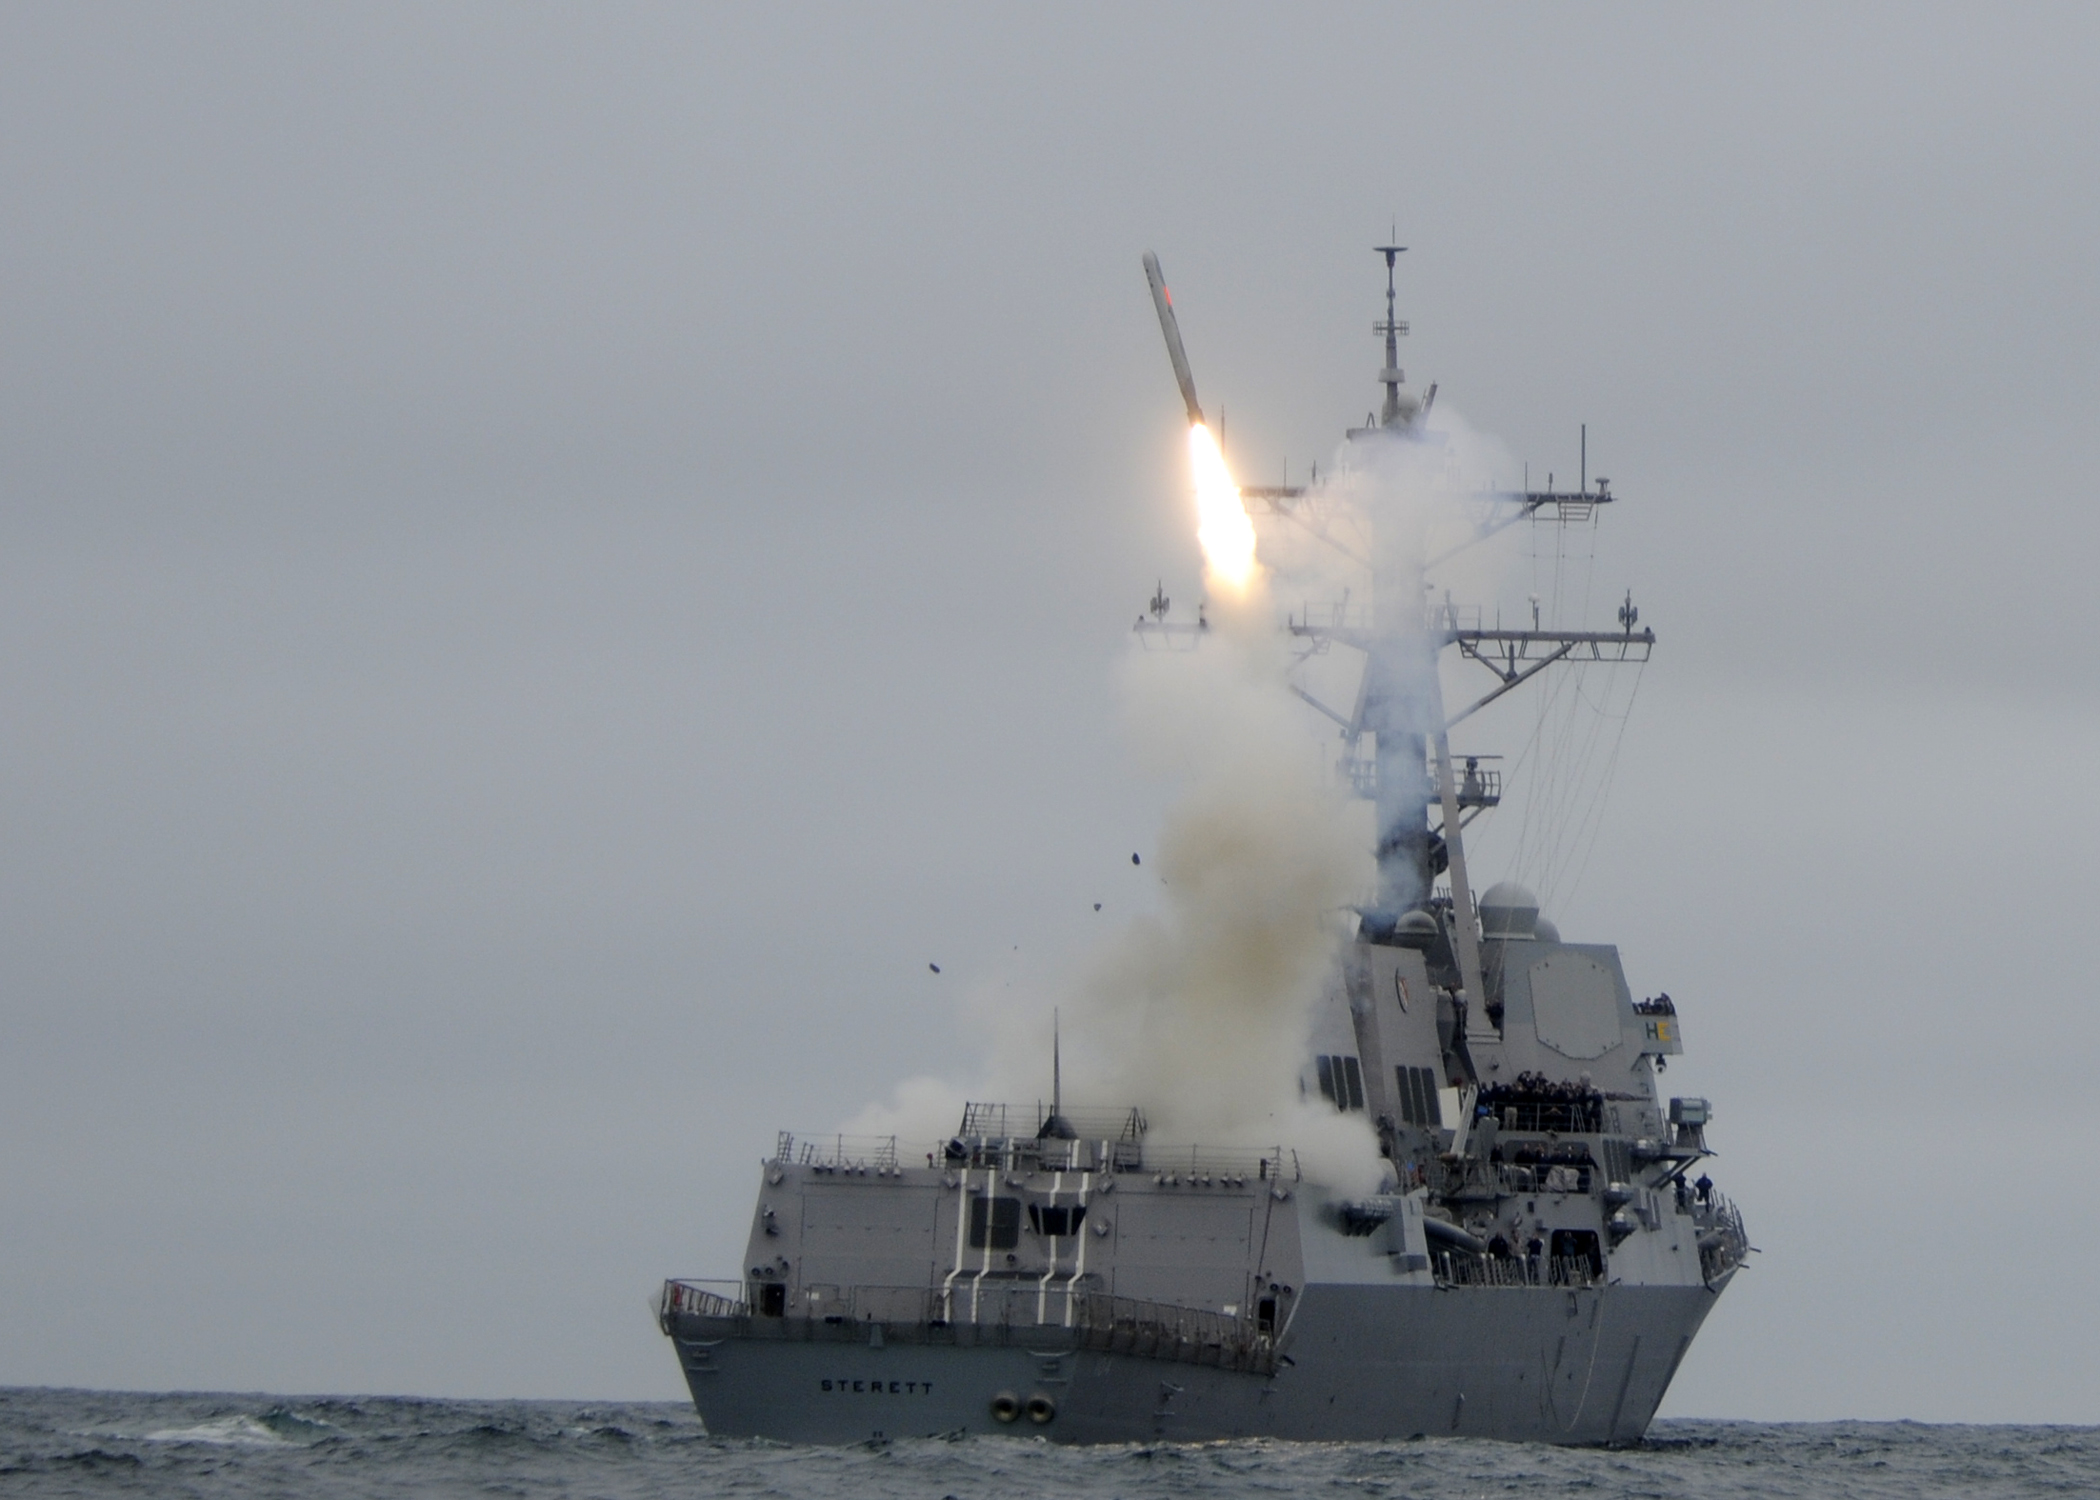 US_Navy_100623-N-0775Y-028_The_guided-missile_destroyer_USS_Sterett_%28DDG_104%29_successfully_launches_its_second_Tomahawk_missile.jpg